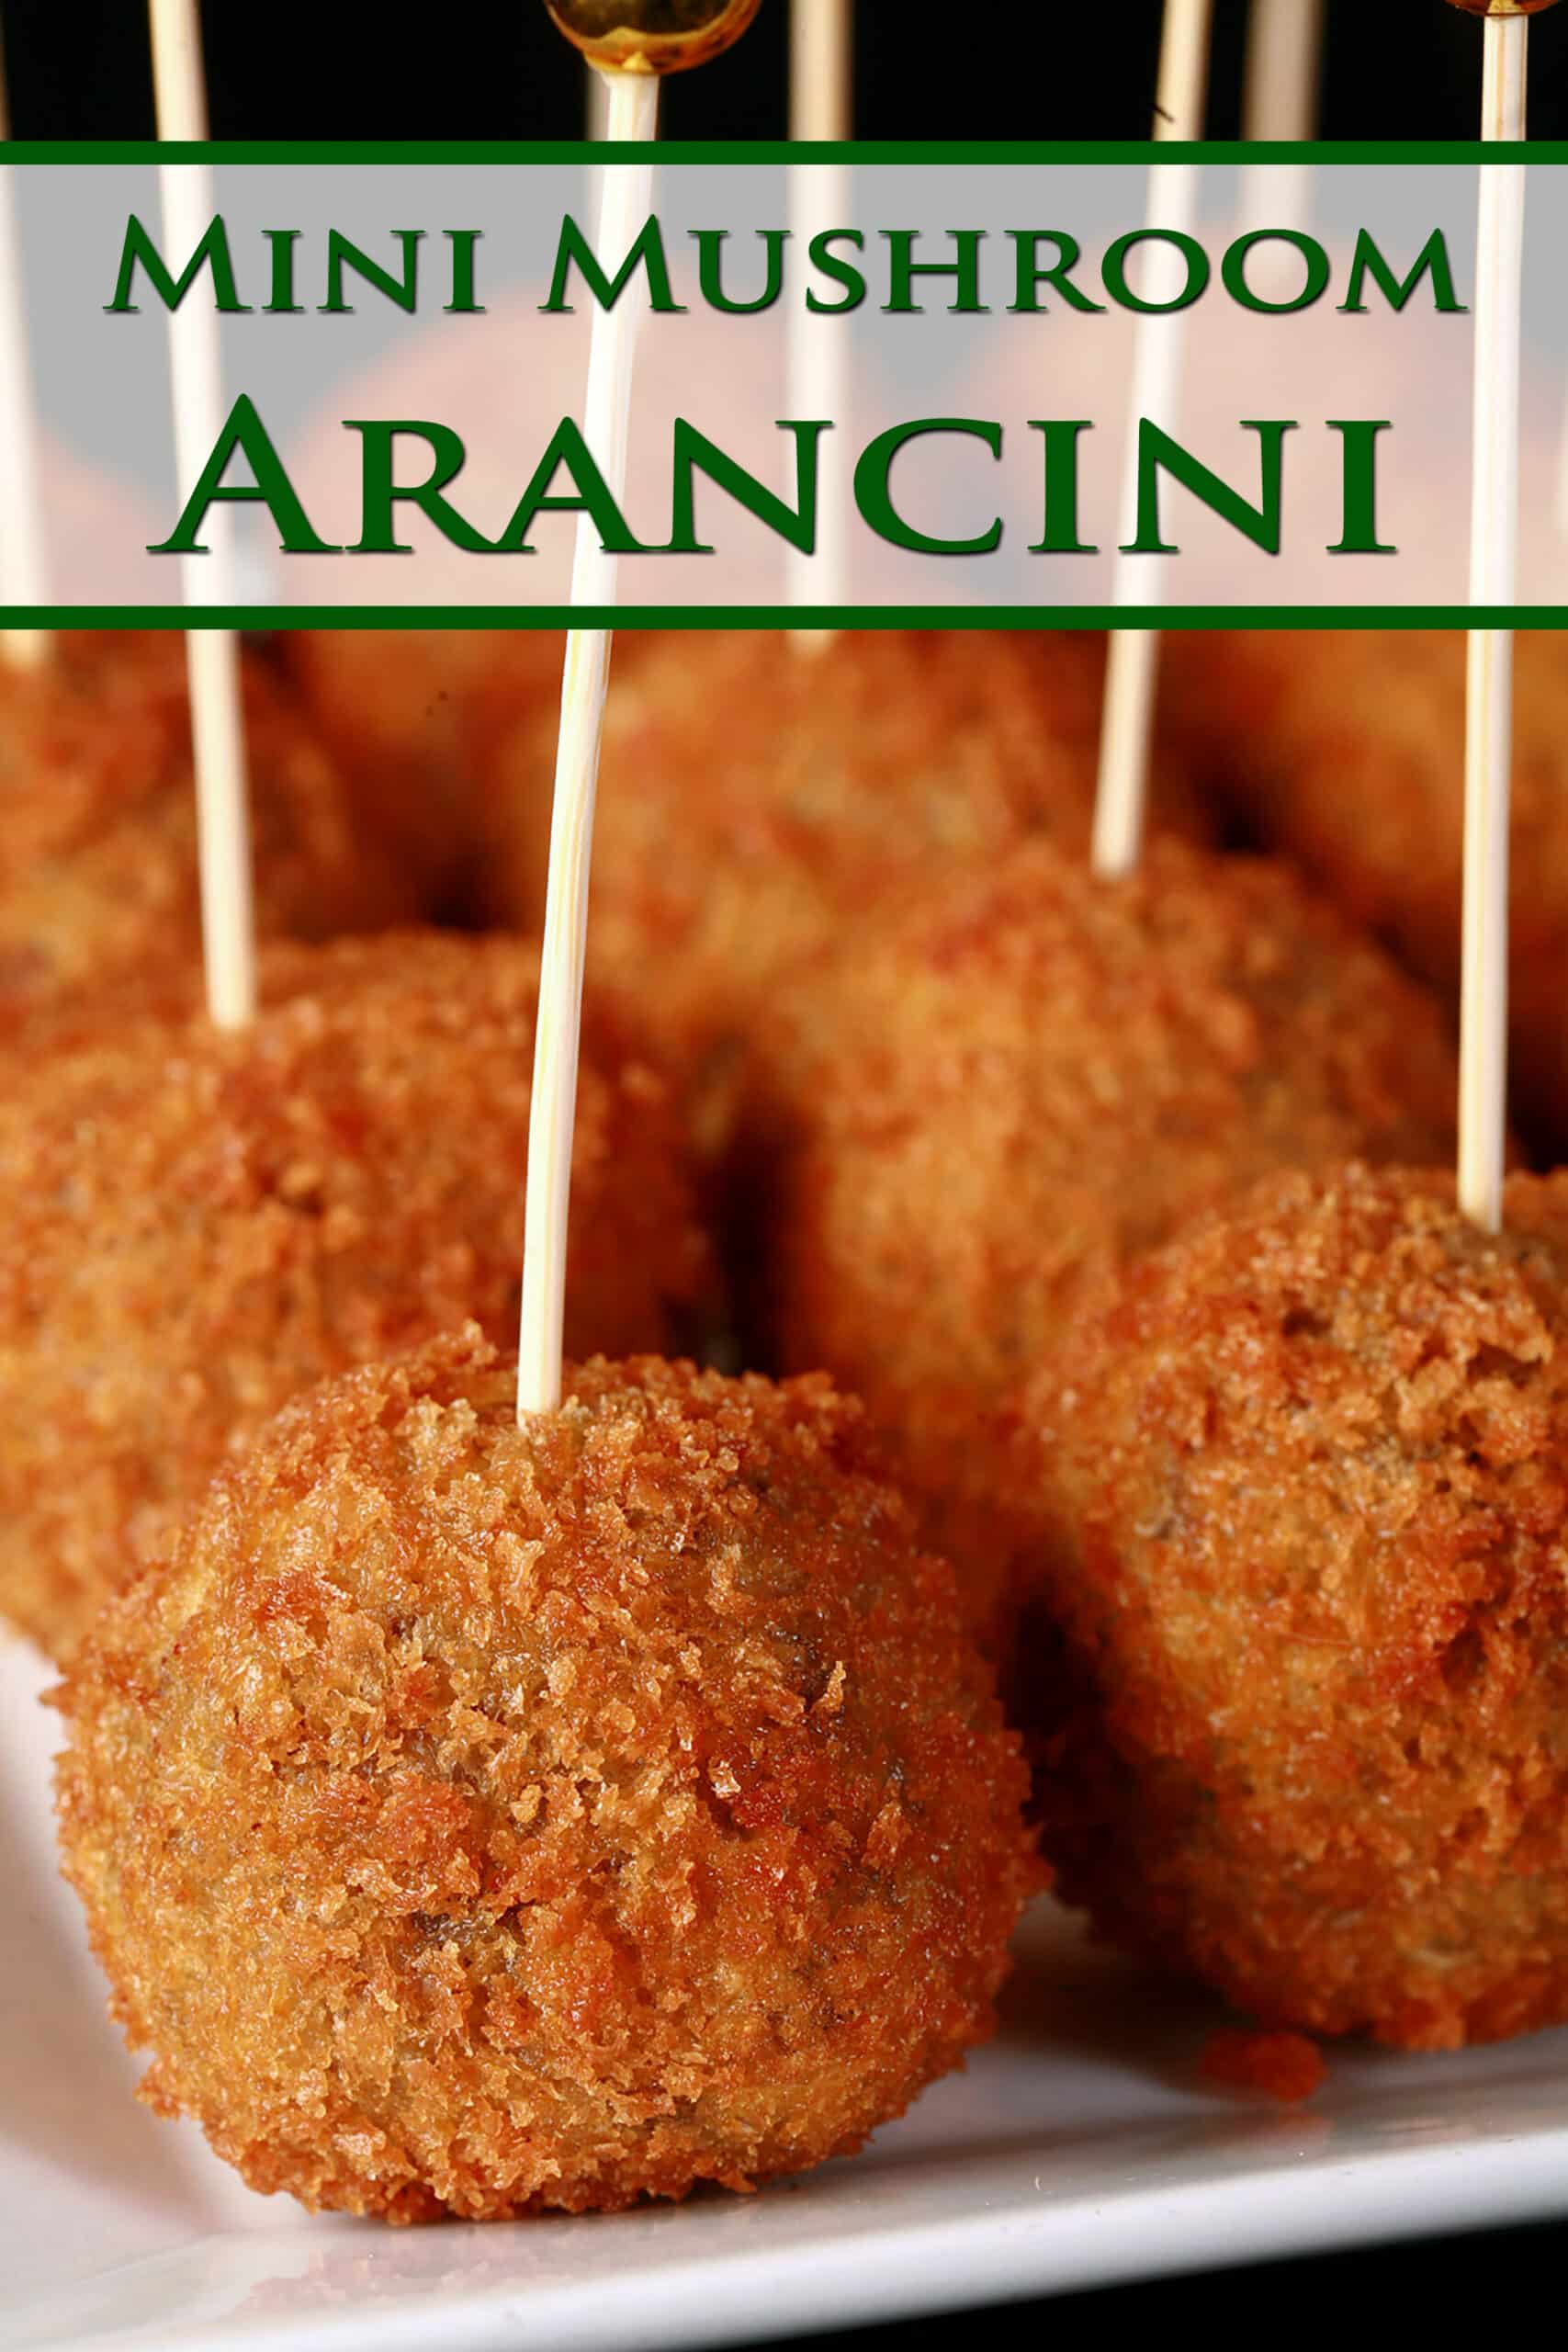 16 mini mushroom risotto balls on a plate, each with a tall toothpick topped with a gold ball. Overlaid text says mini mushroom arancini.